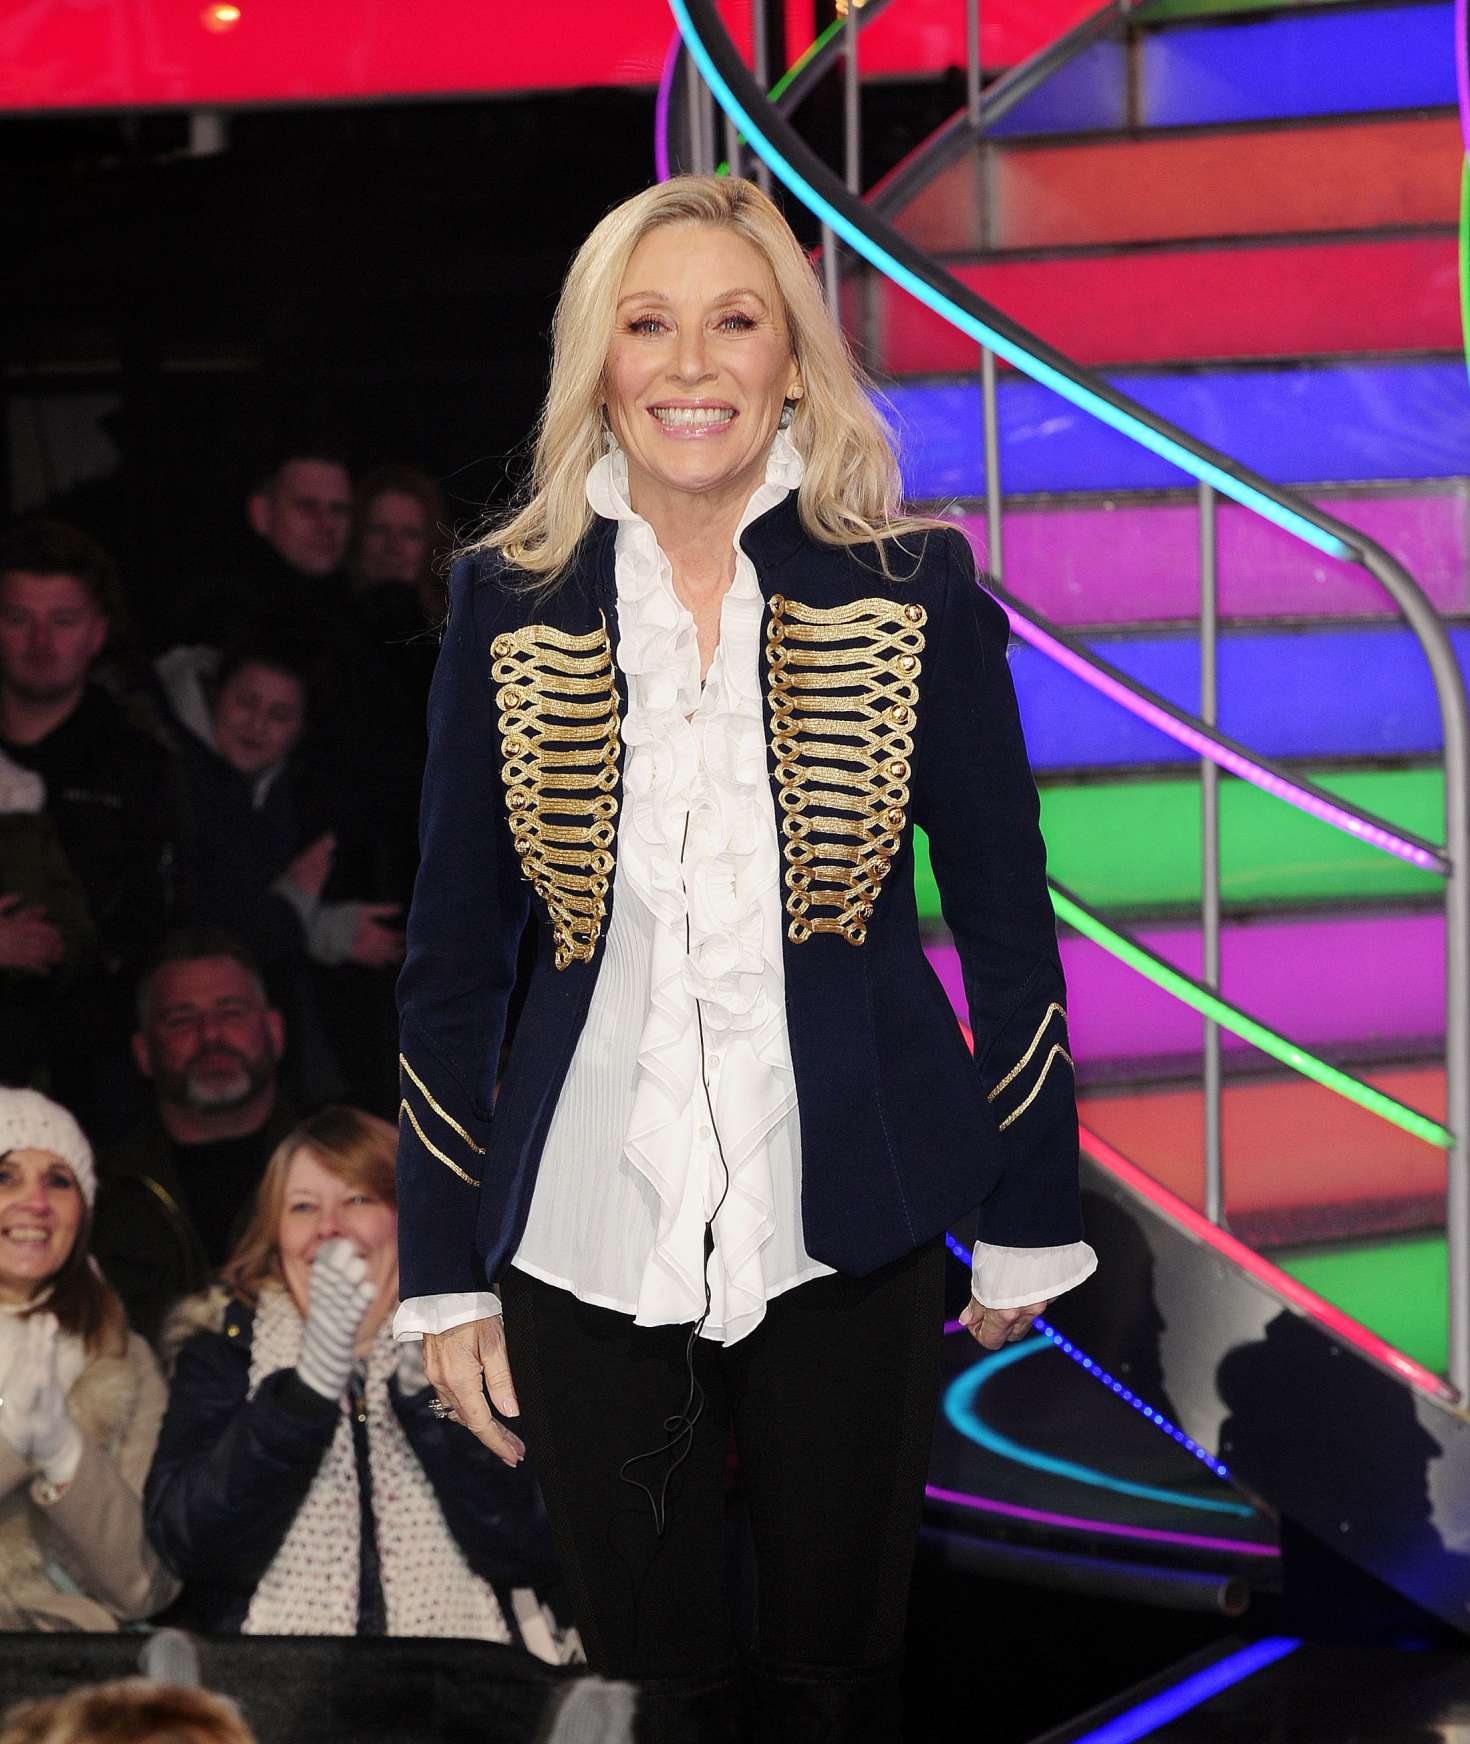 Angie Best Celebrity Big Brother Tv Show In Hertfordshire Gotceleb